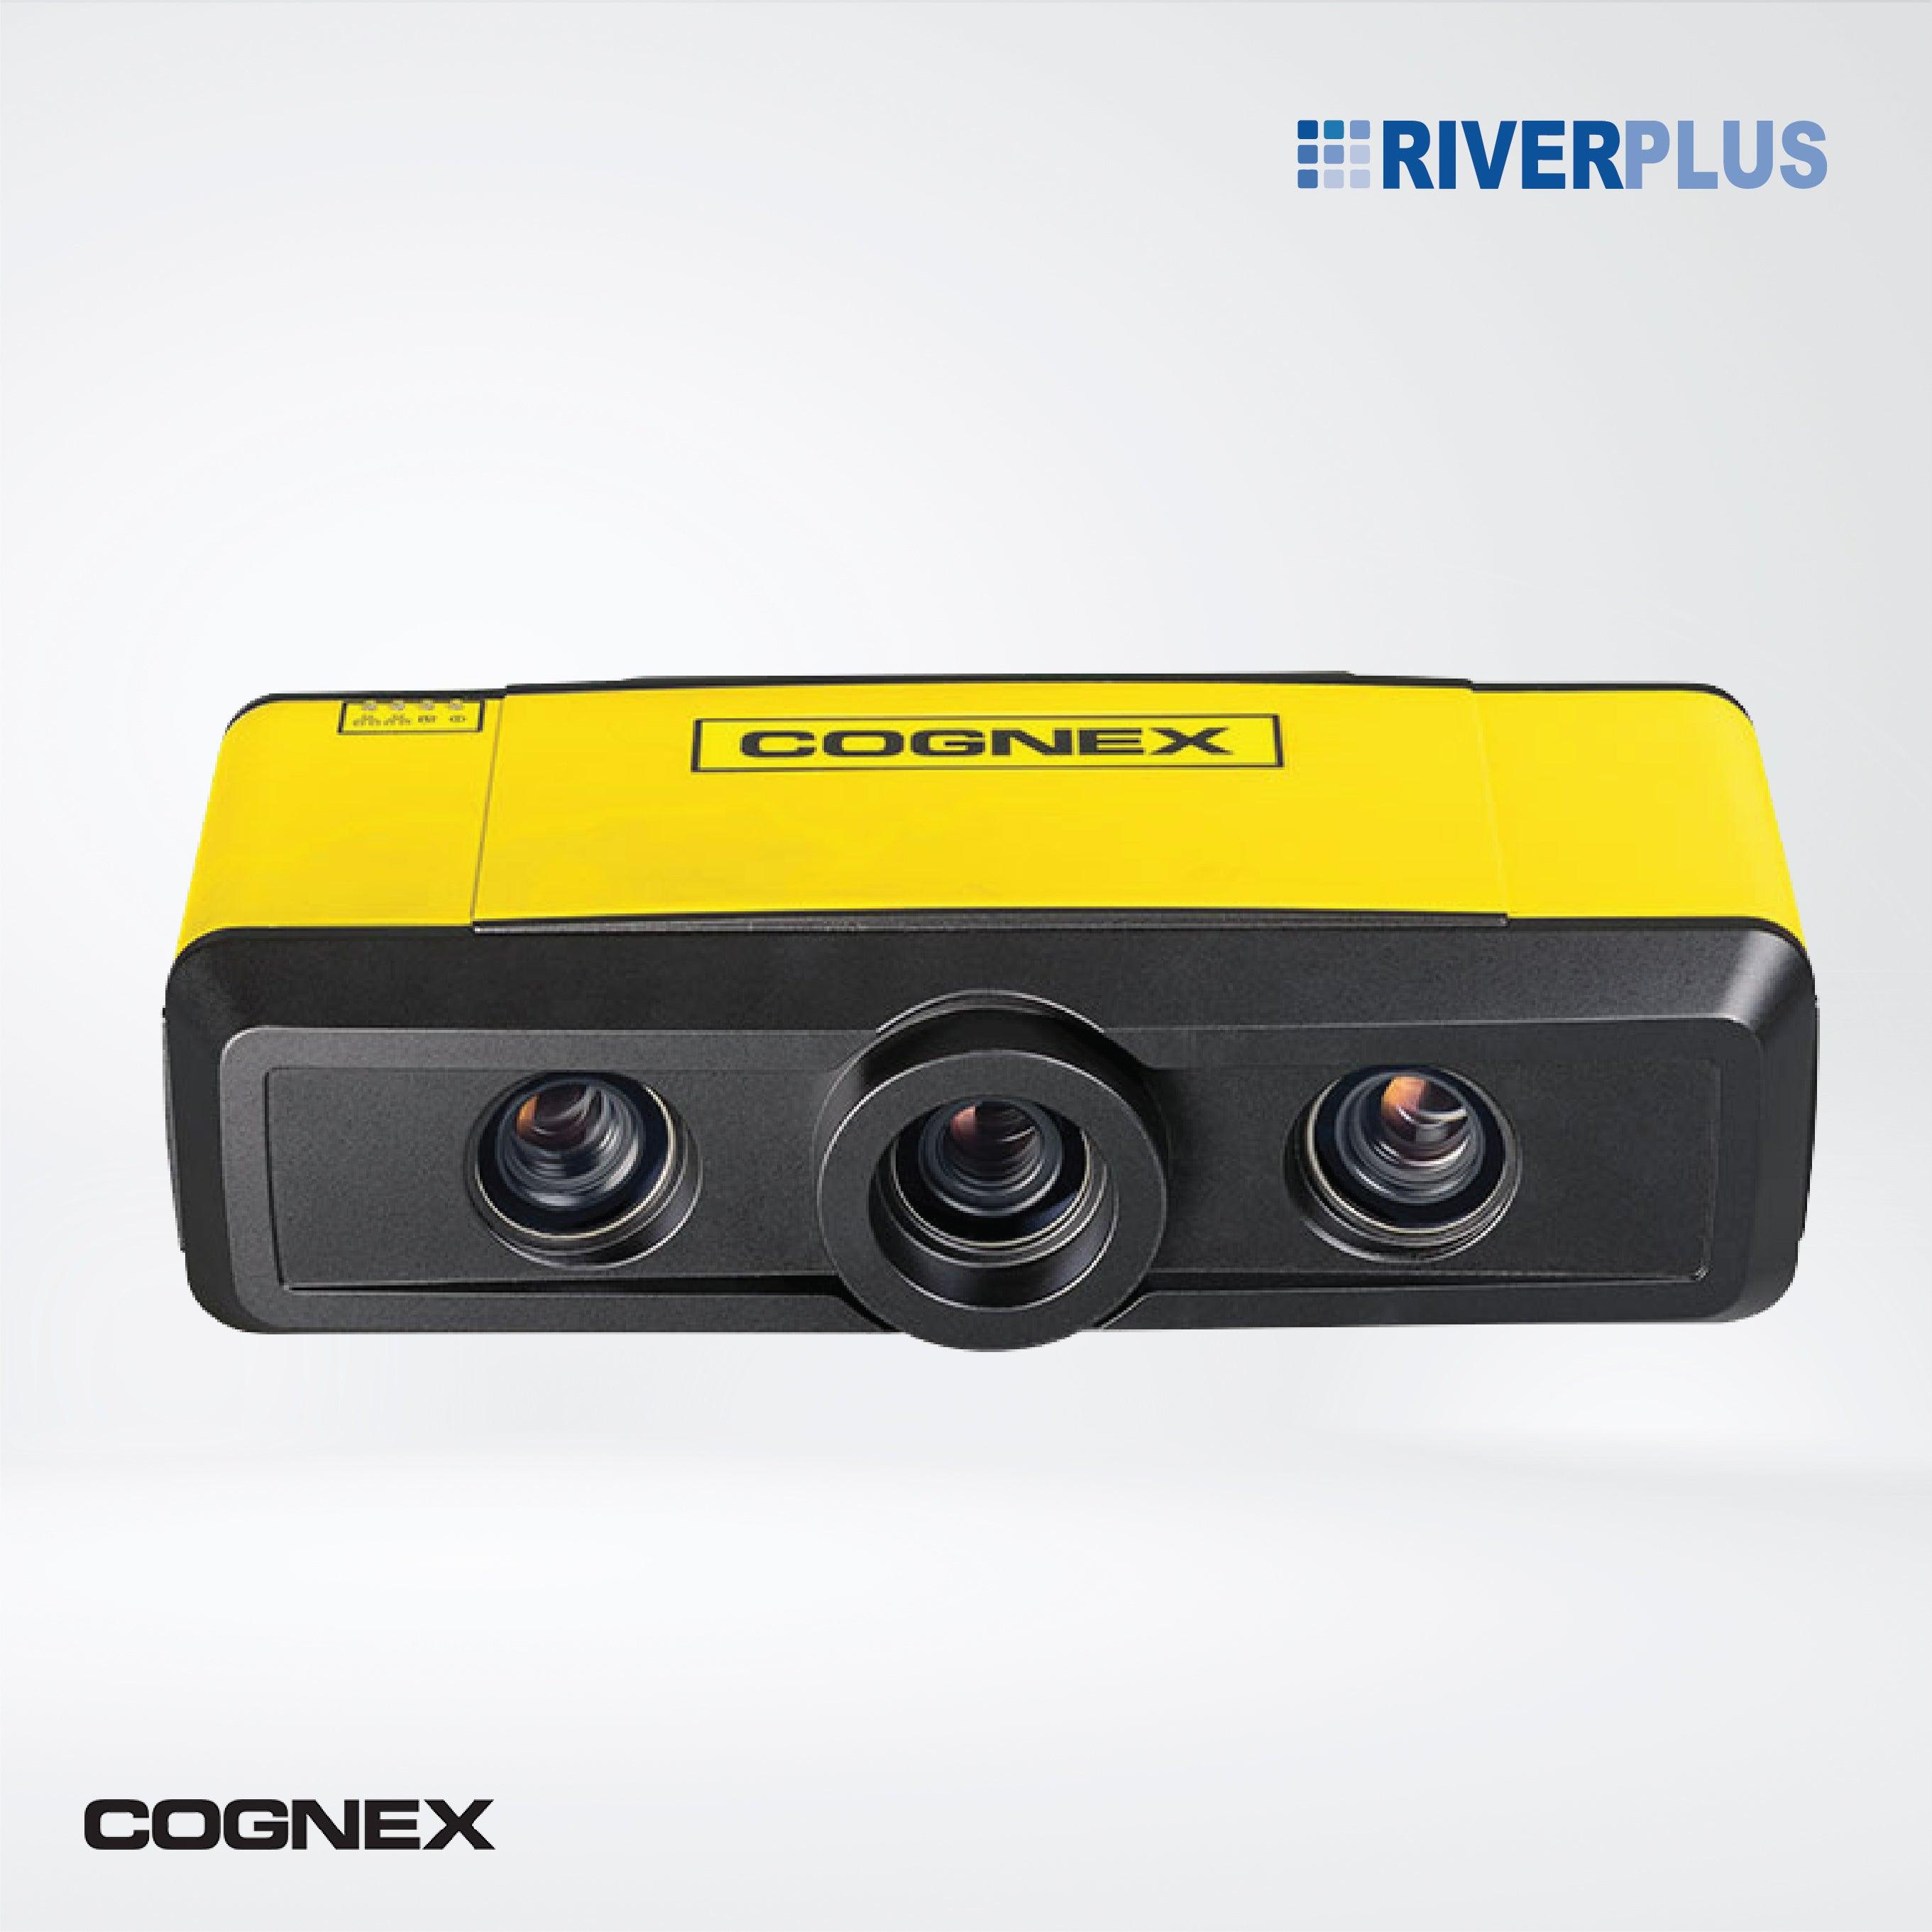 3D-A5000 series area scan 3D camera , Solves 3D applications with unmatched performance, accuracy, and ruggedness - Riverplus